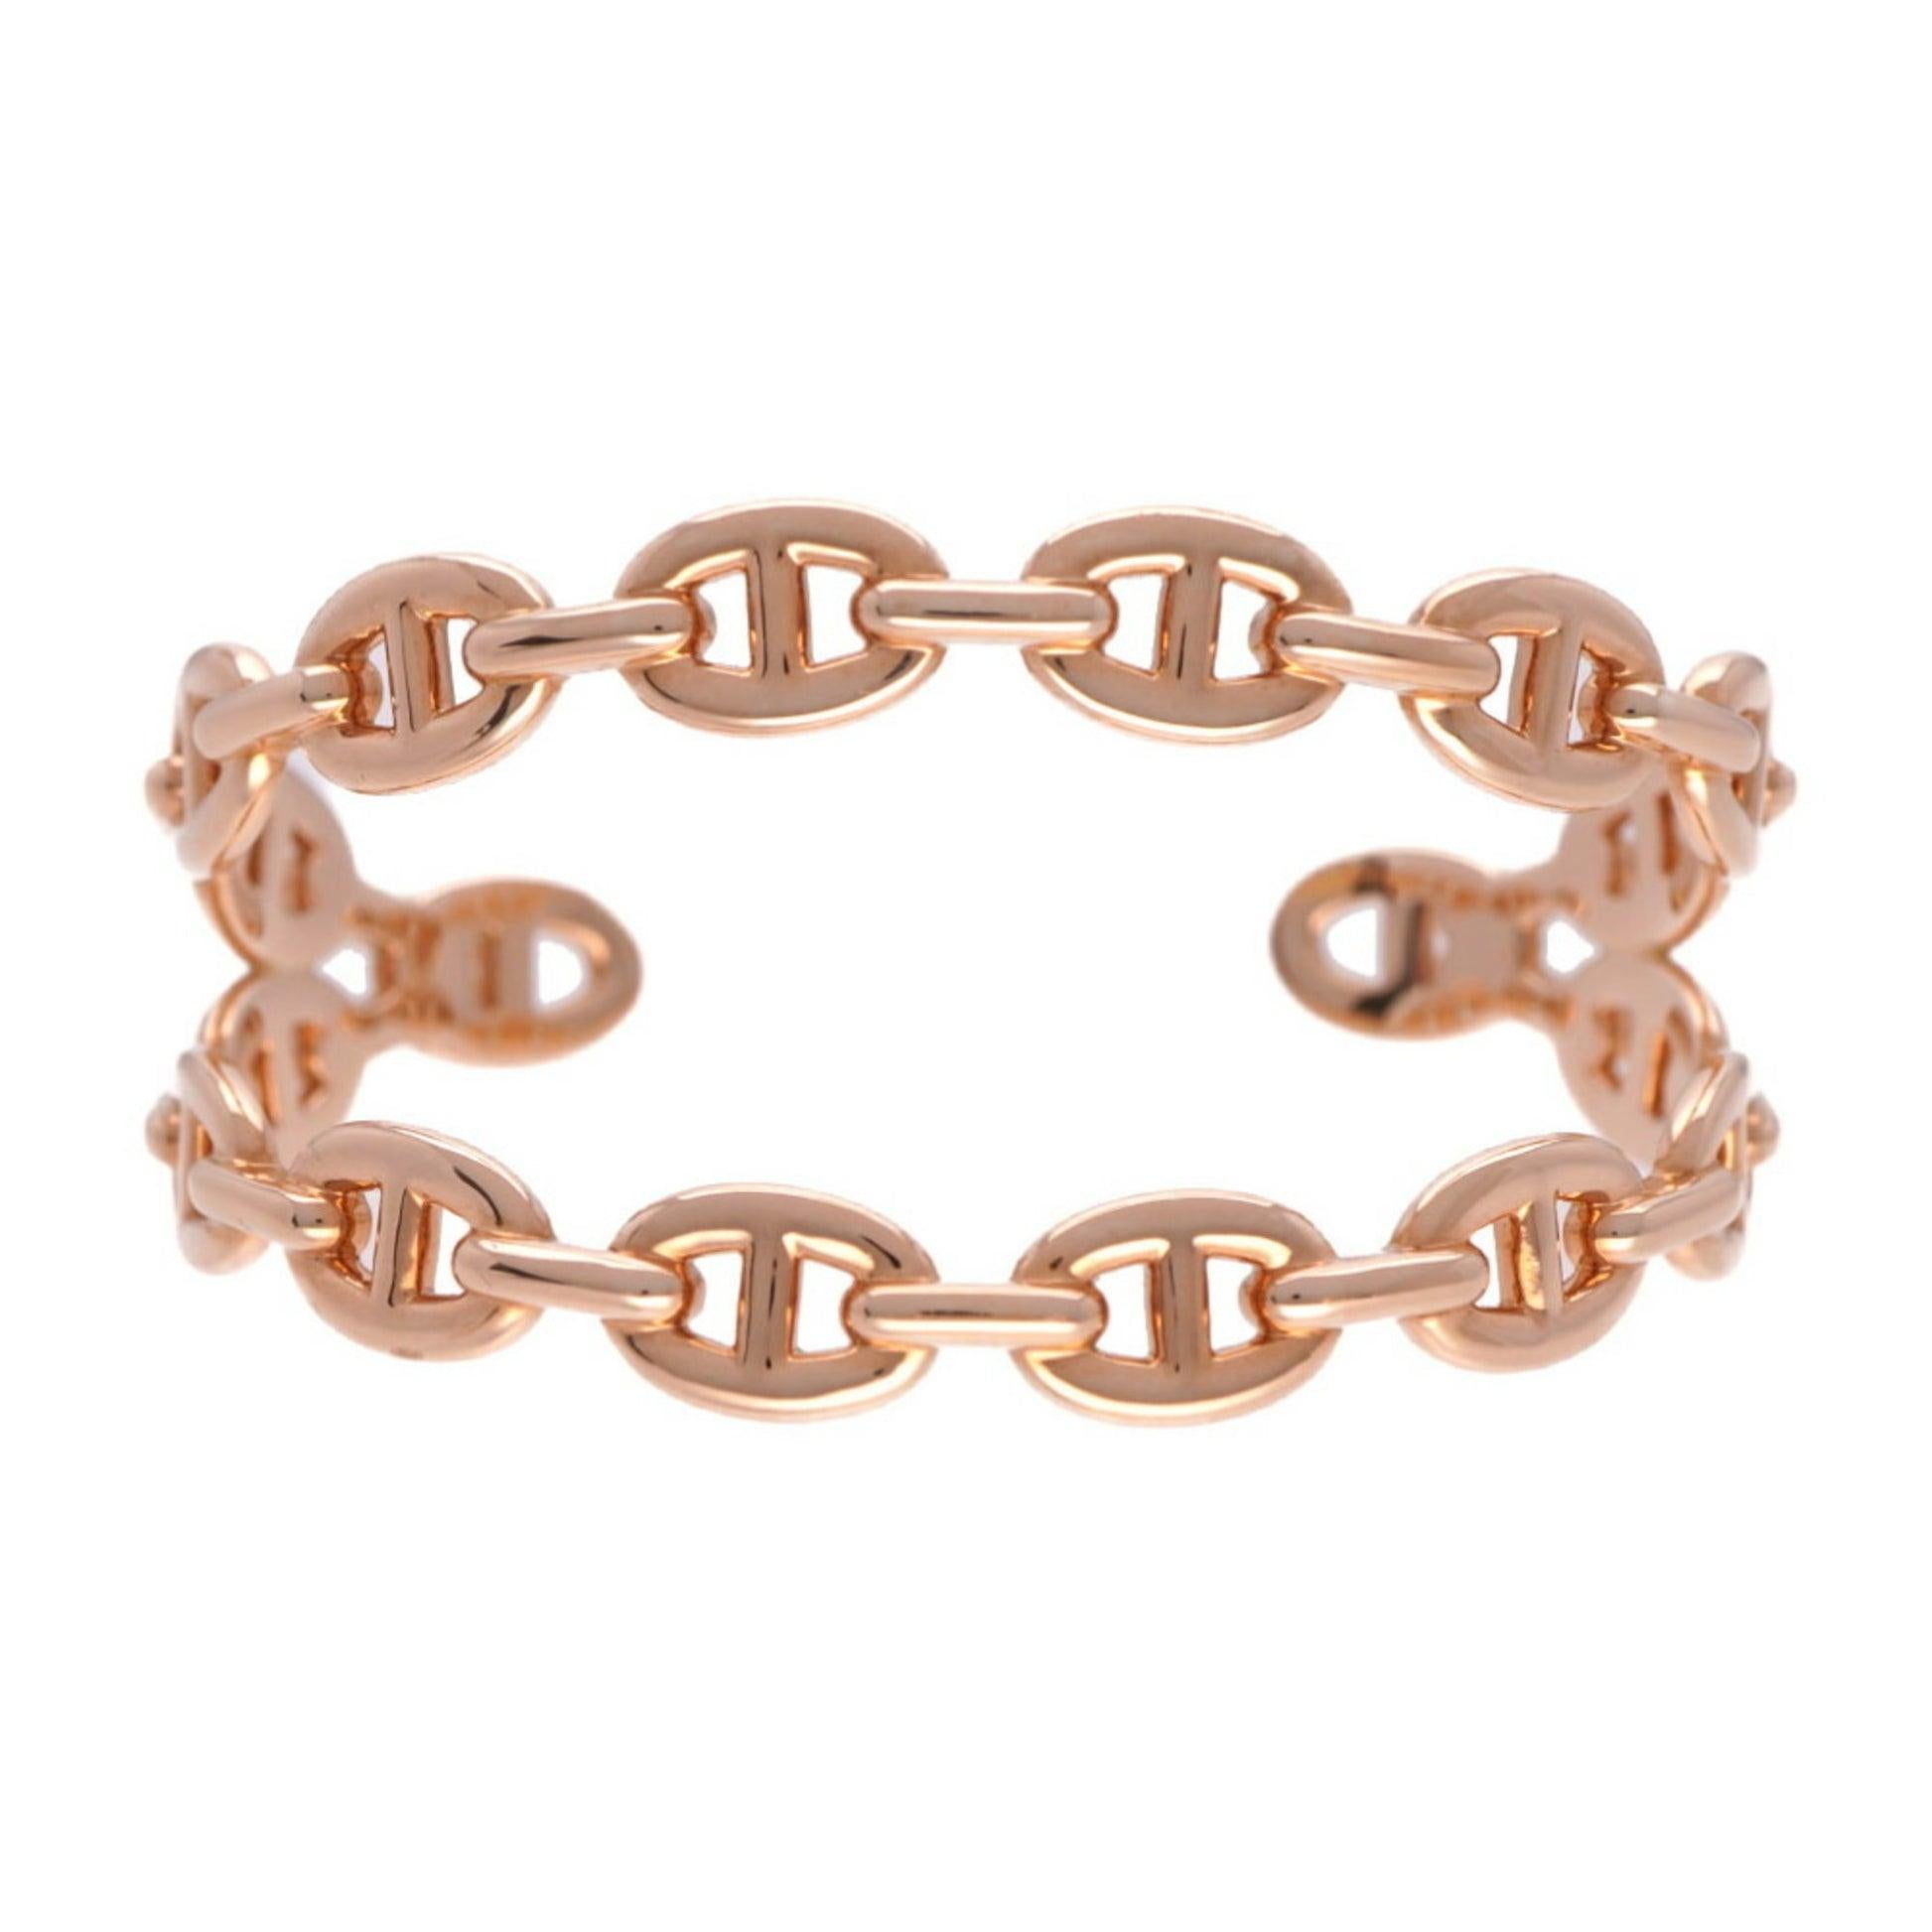 Hermes Chene D'Ancle Anchenee Double Bracelet in 18K Pink Gold

Additional Information:
Brand: Hermes
Gender: Women
Line: Chaine d'Ancre
Country of Origin: France
Color: Pink gold
Material: Pink gold (18K)
Condition details: This item has been used